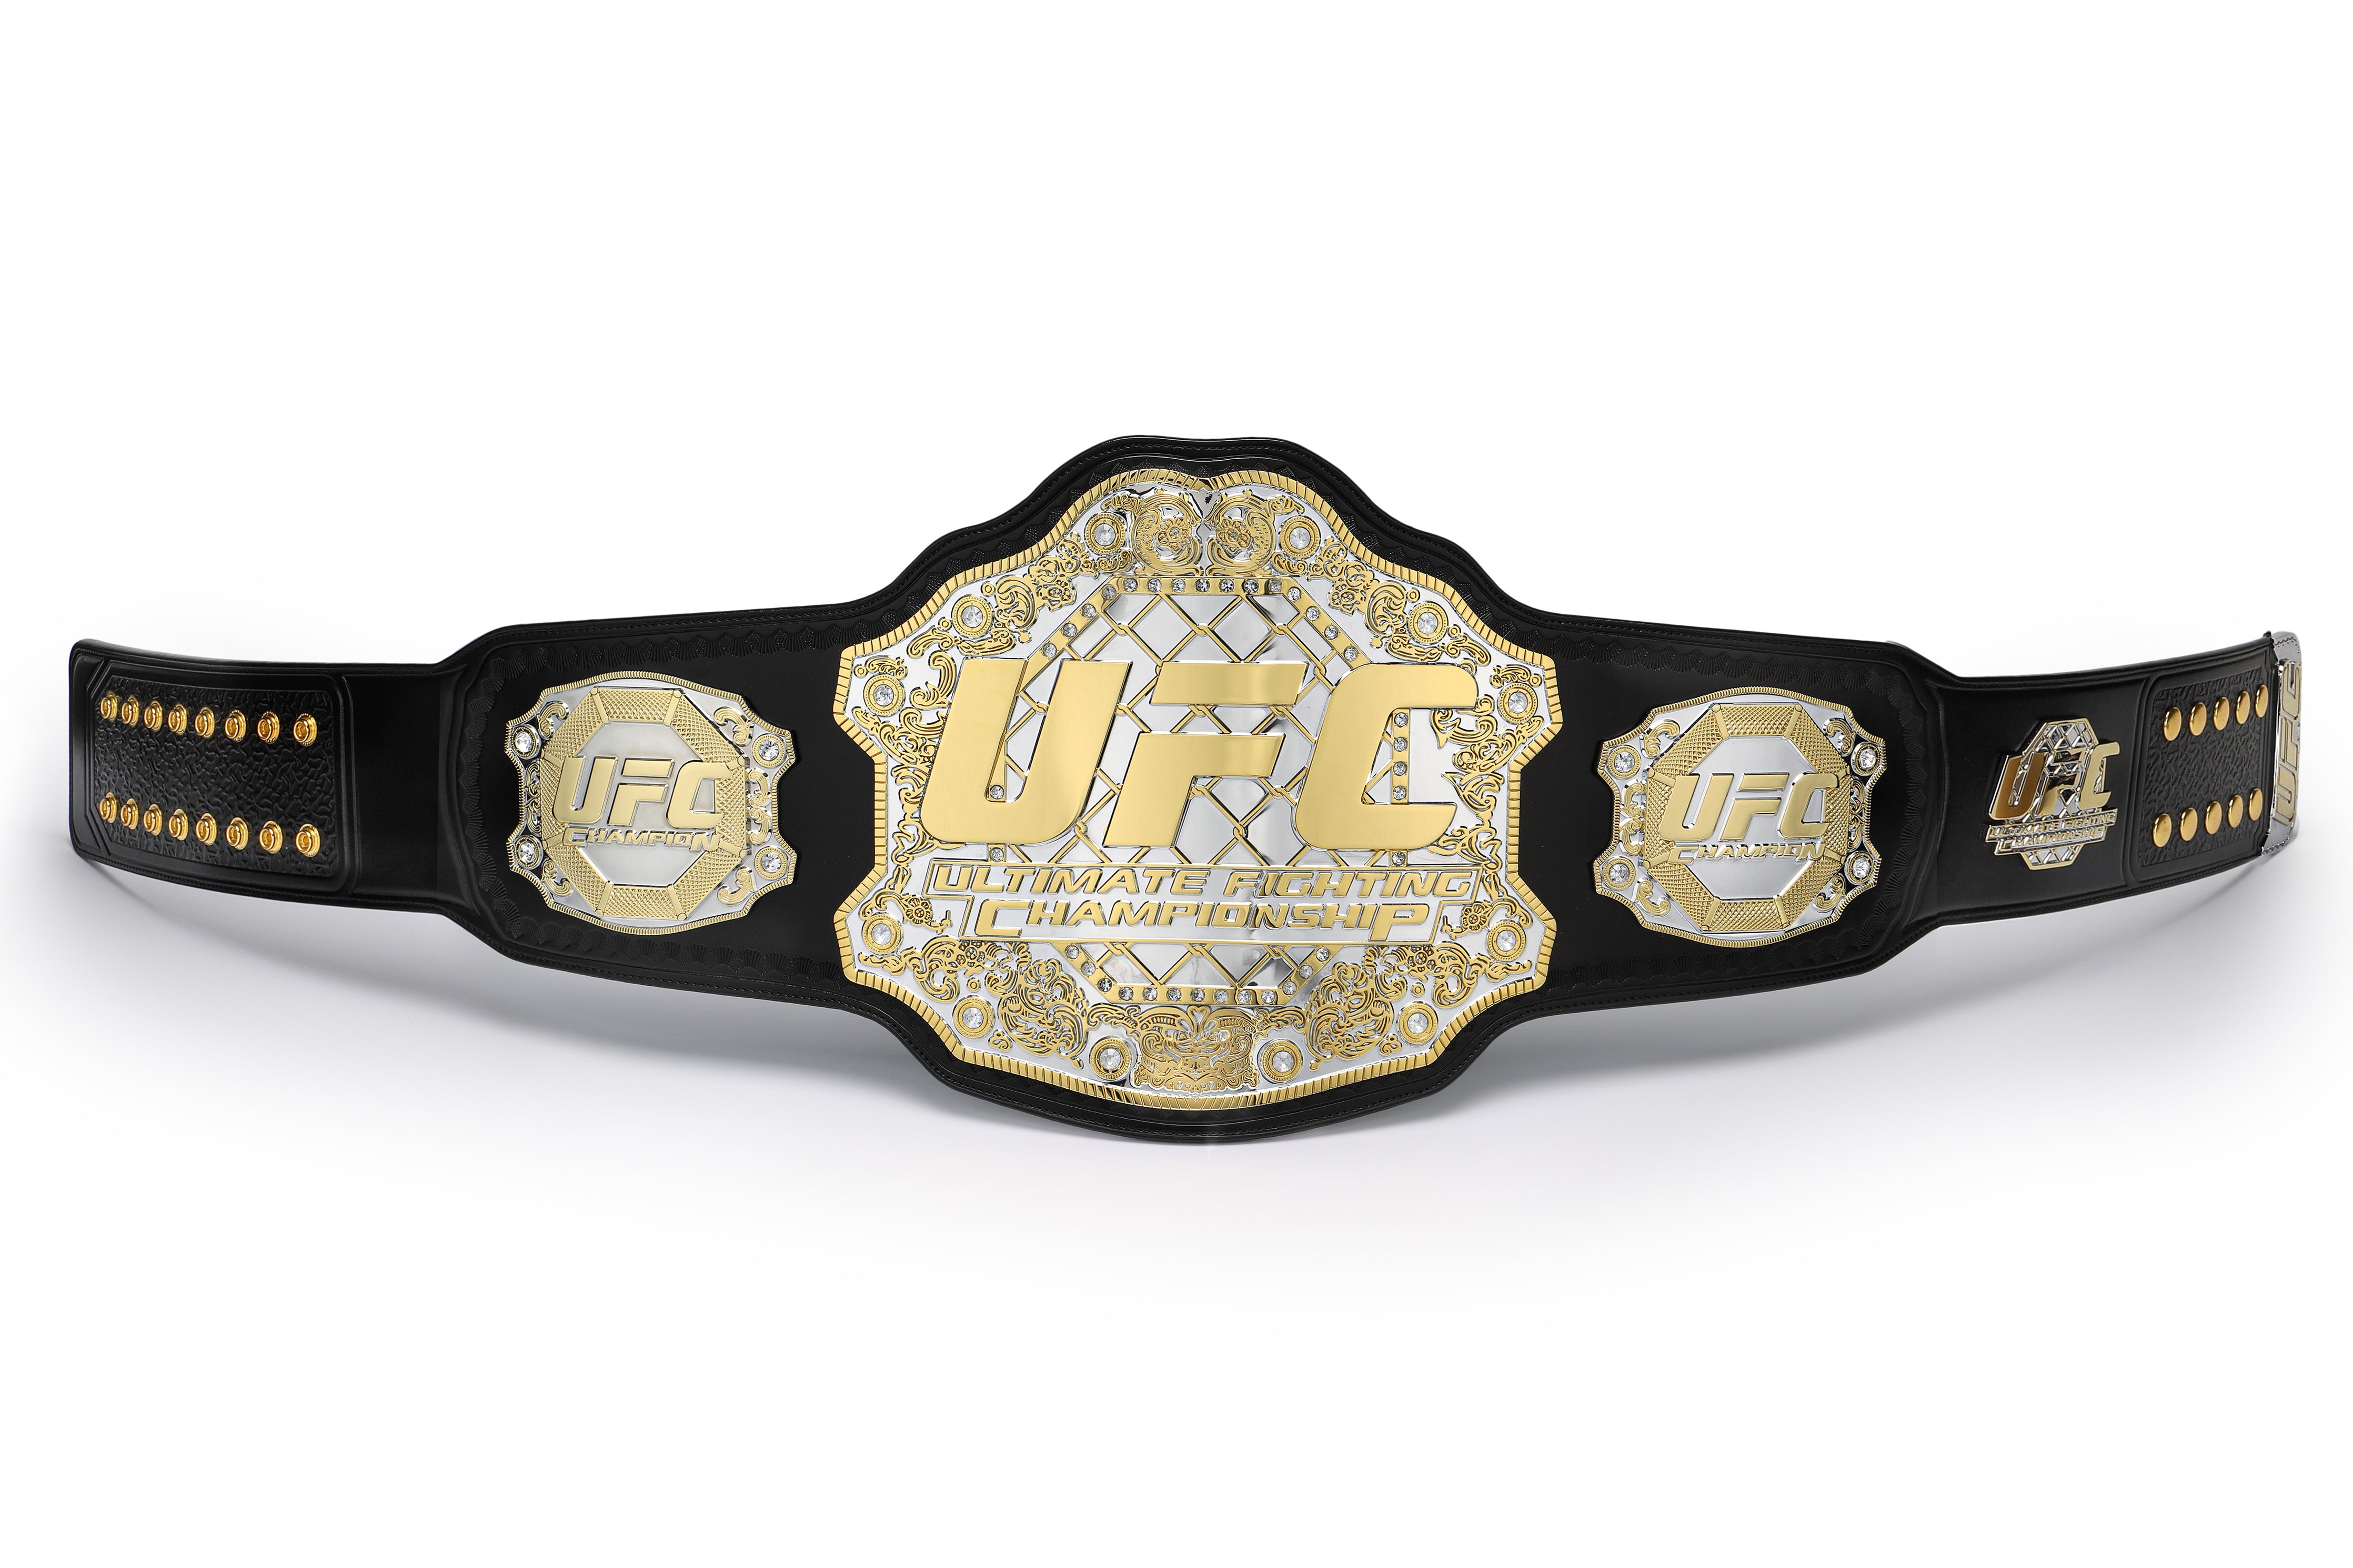 Championship Belt Replicas - What You Need To Know